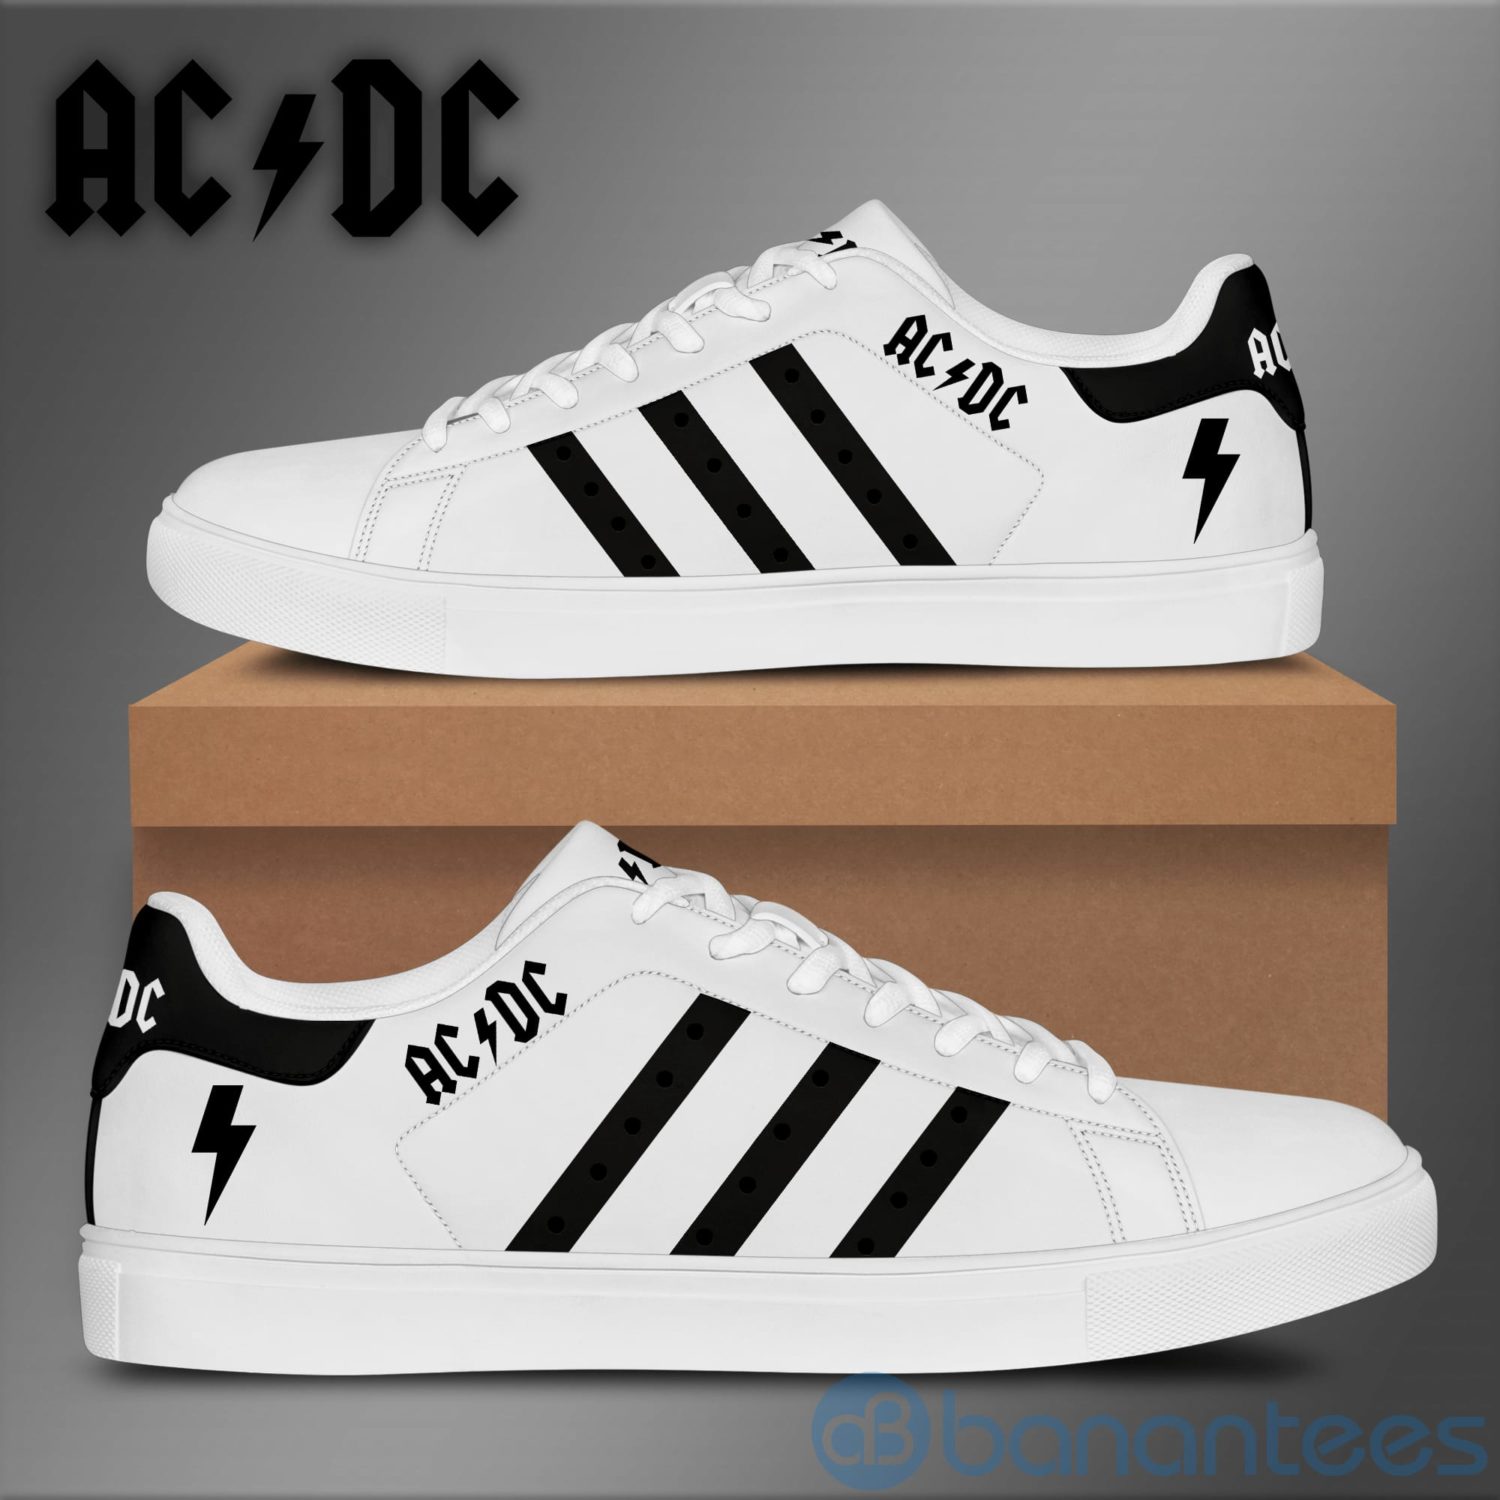 Acdc White Low Top Skate Shoes